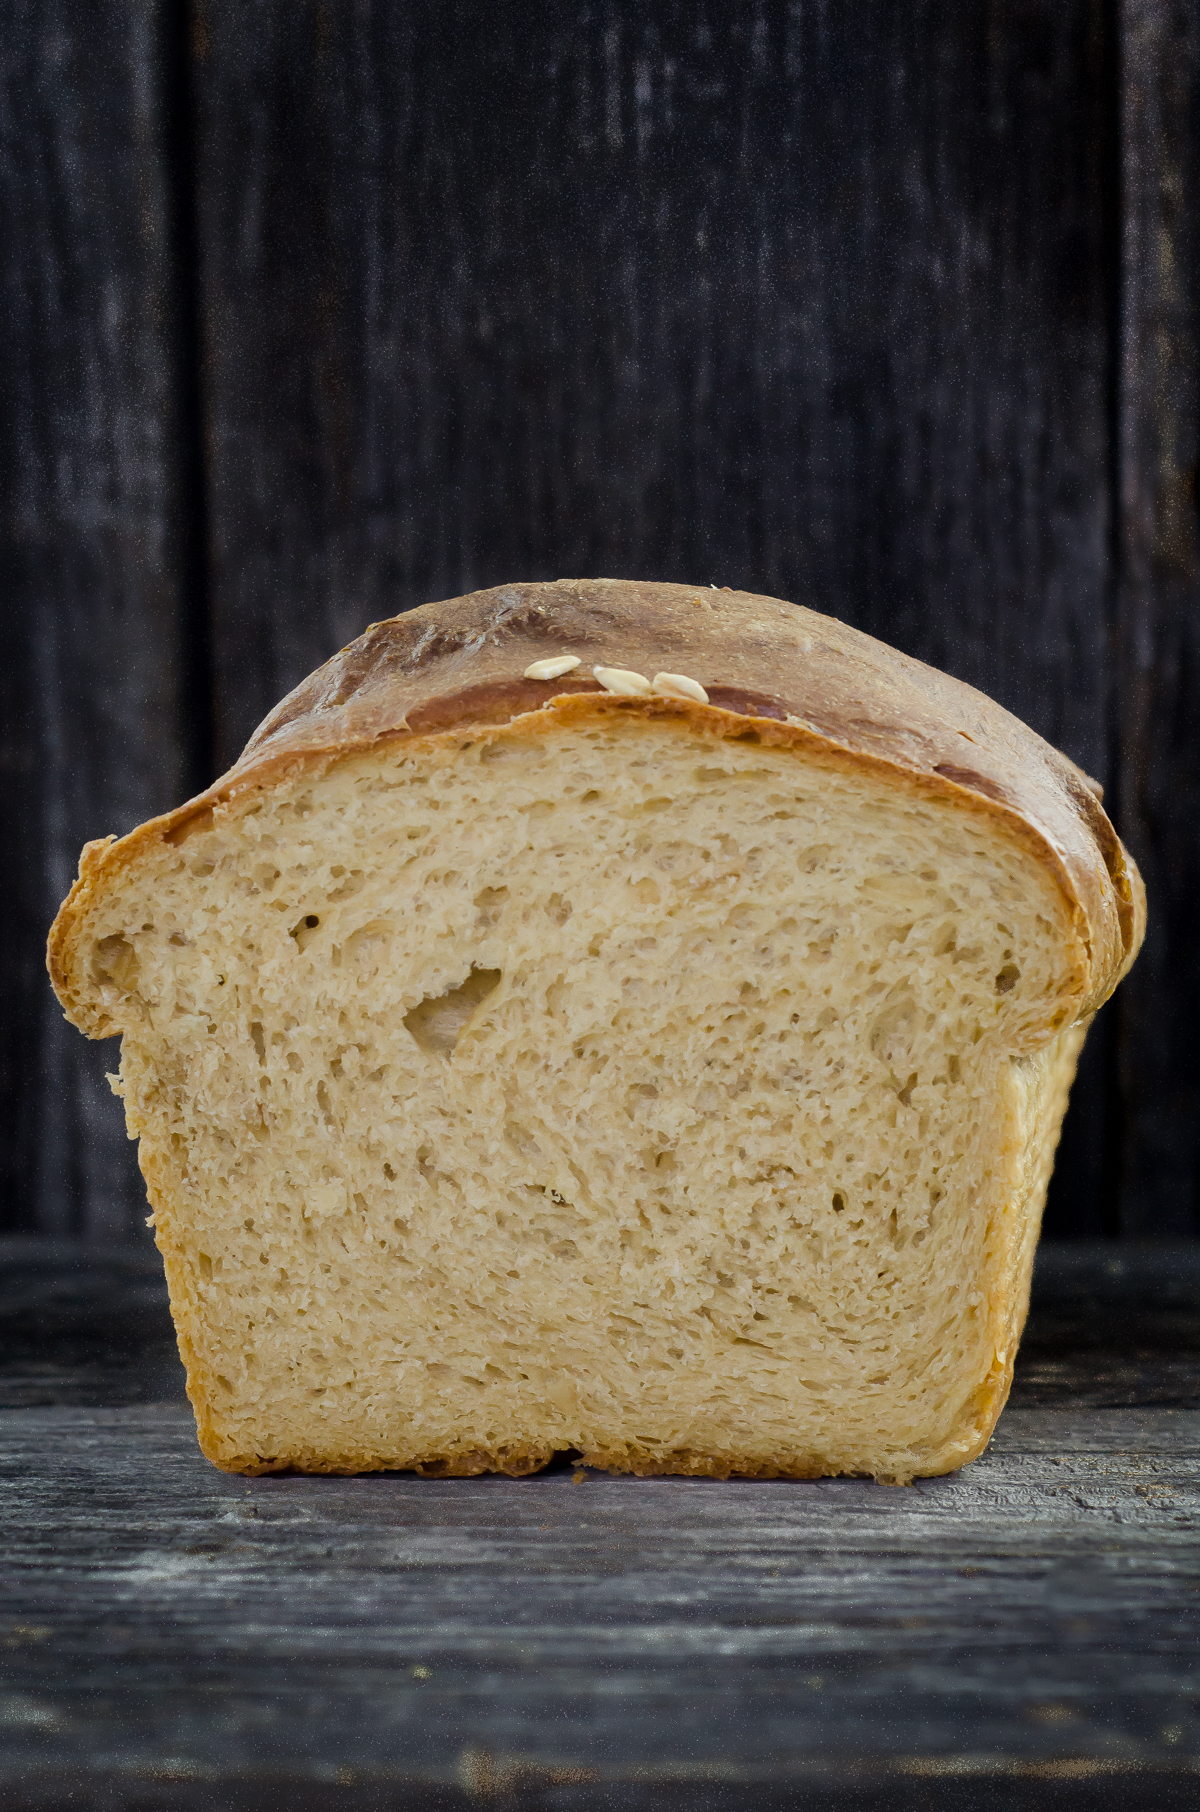 Milk and Honey Sandwich Bread made with Identity-Preserved Whole White Wheat Flour, Oats, Milk, Honey and yeast. It's super easy, with a great crumb and crust. 